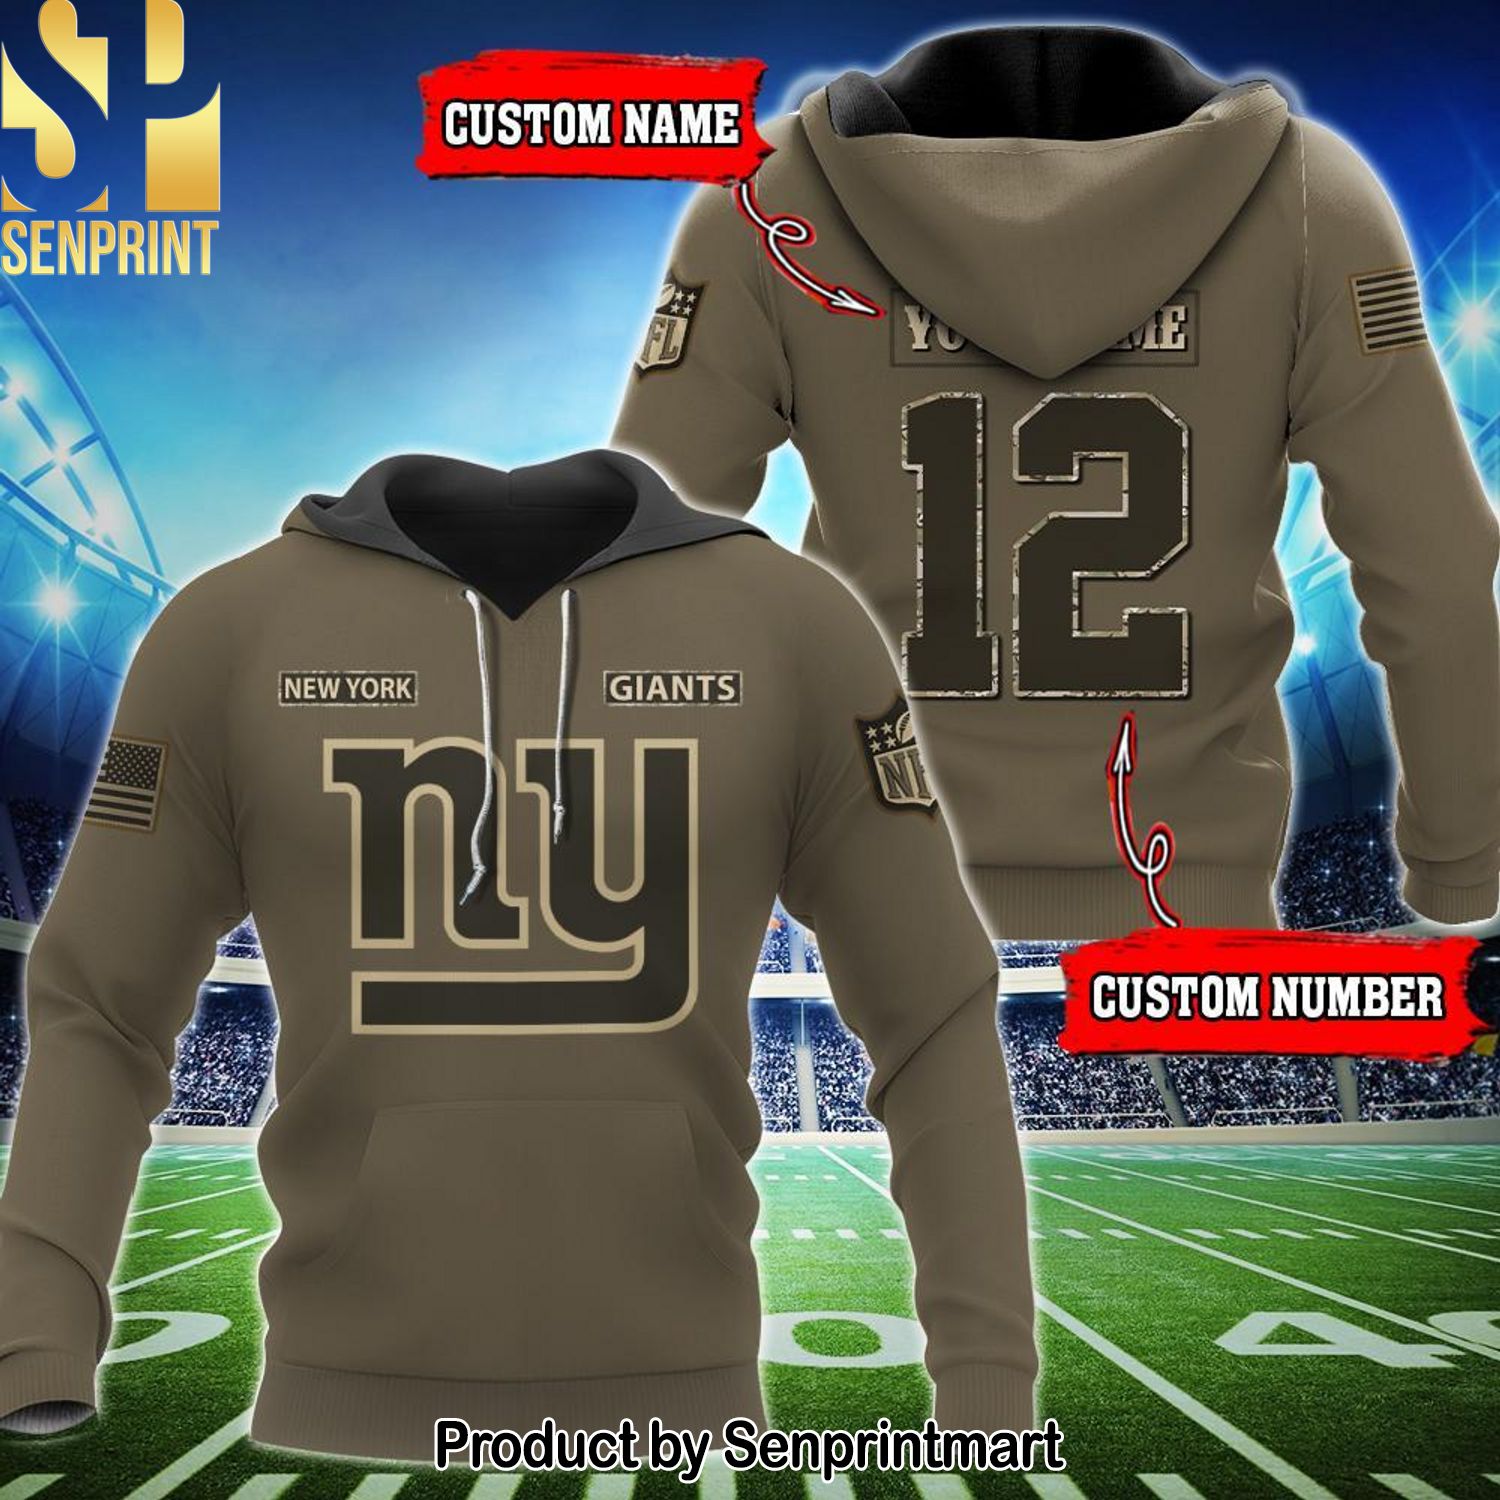 Personalized Your Name And Custom Number NFL New York Giants Amazing Outfit Shirt